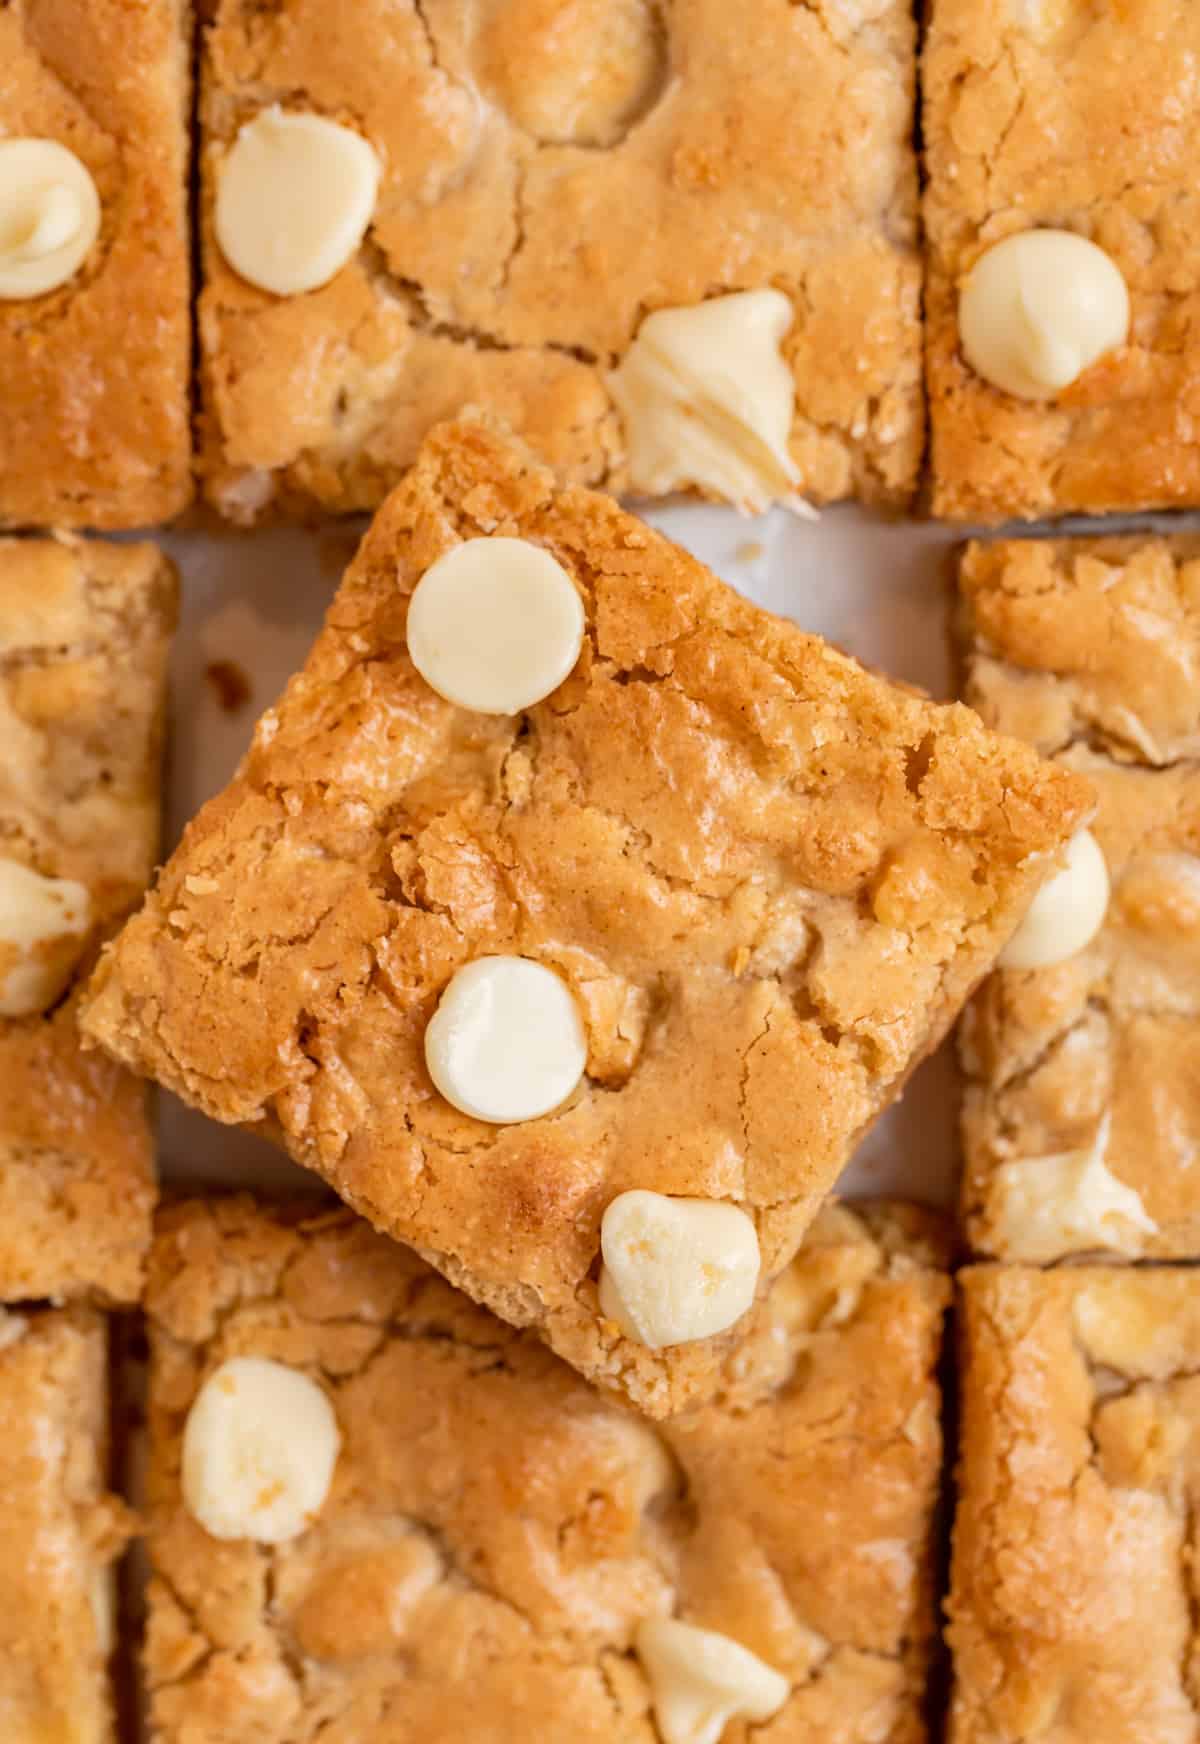 Gluten free almond flour blondies with white chocolate chips lined up with top slice tilted slightly.